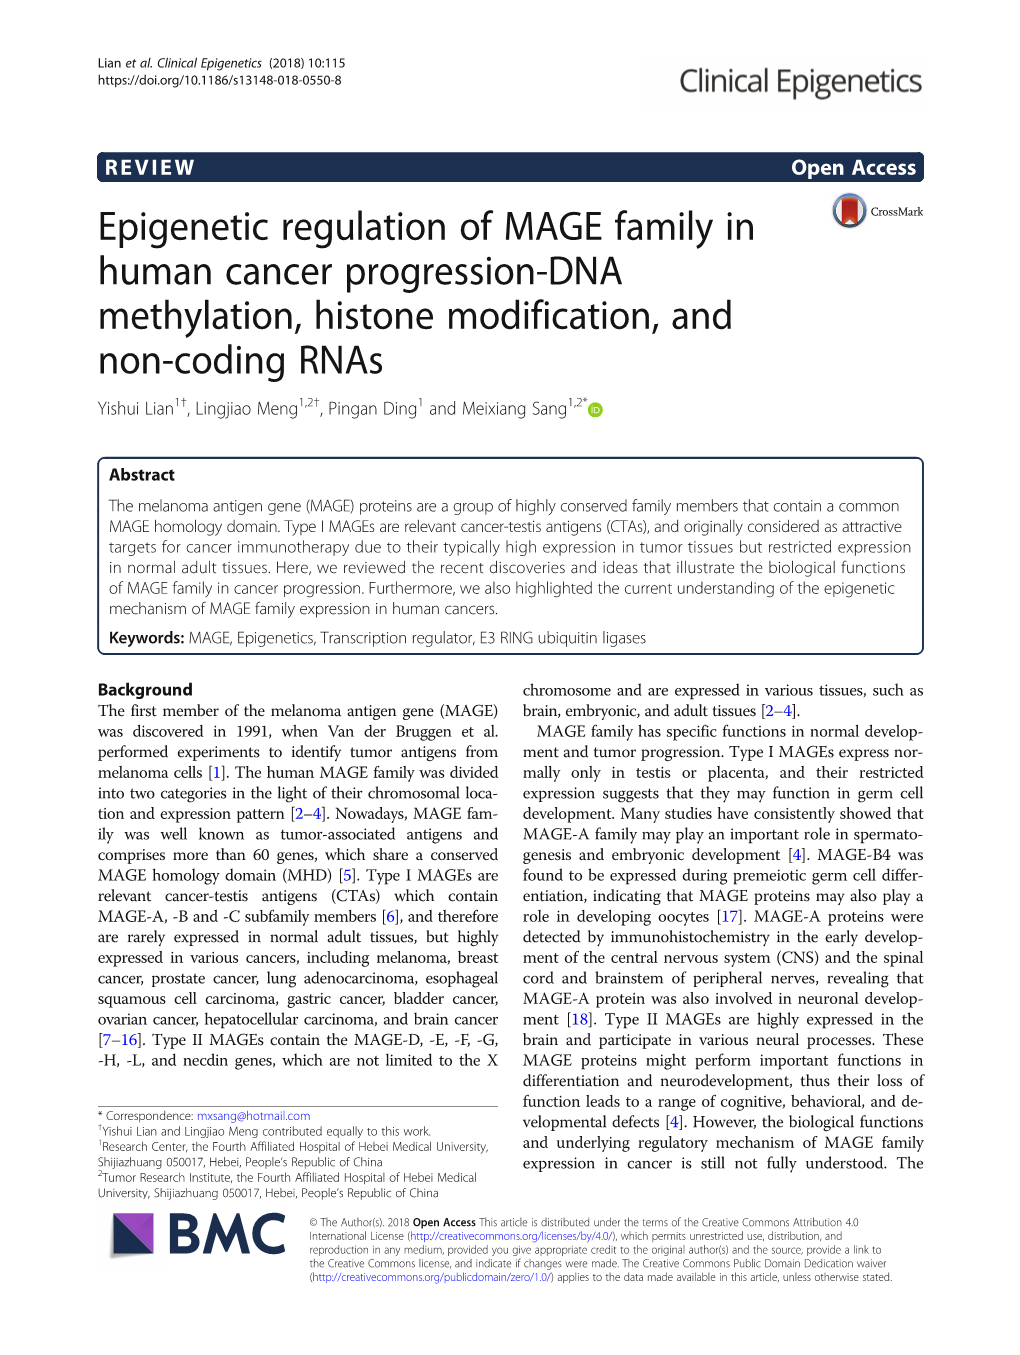 Epigenetic Regulation of MAGE Family in Human Cancer Progression-DNA